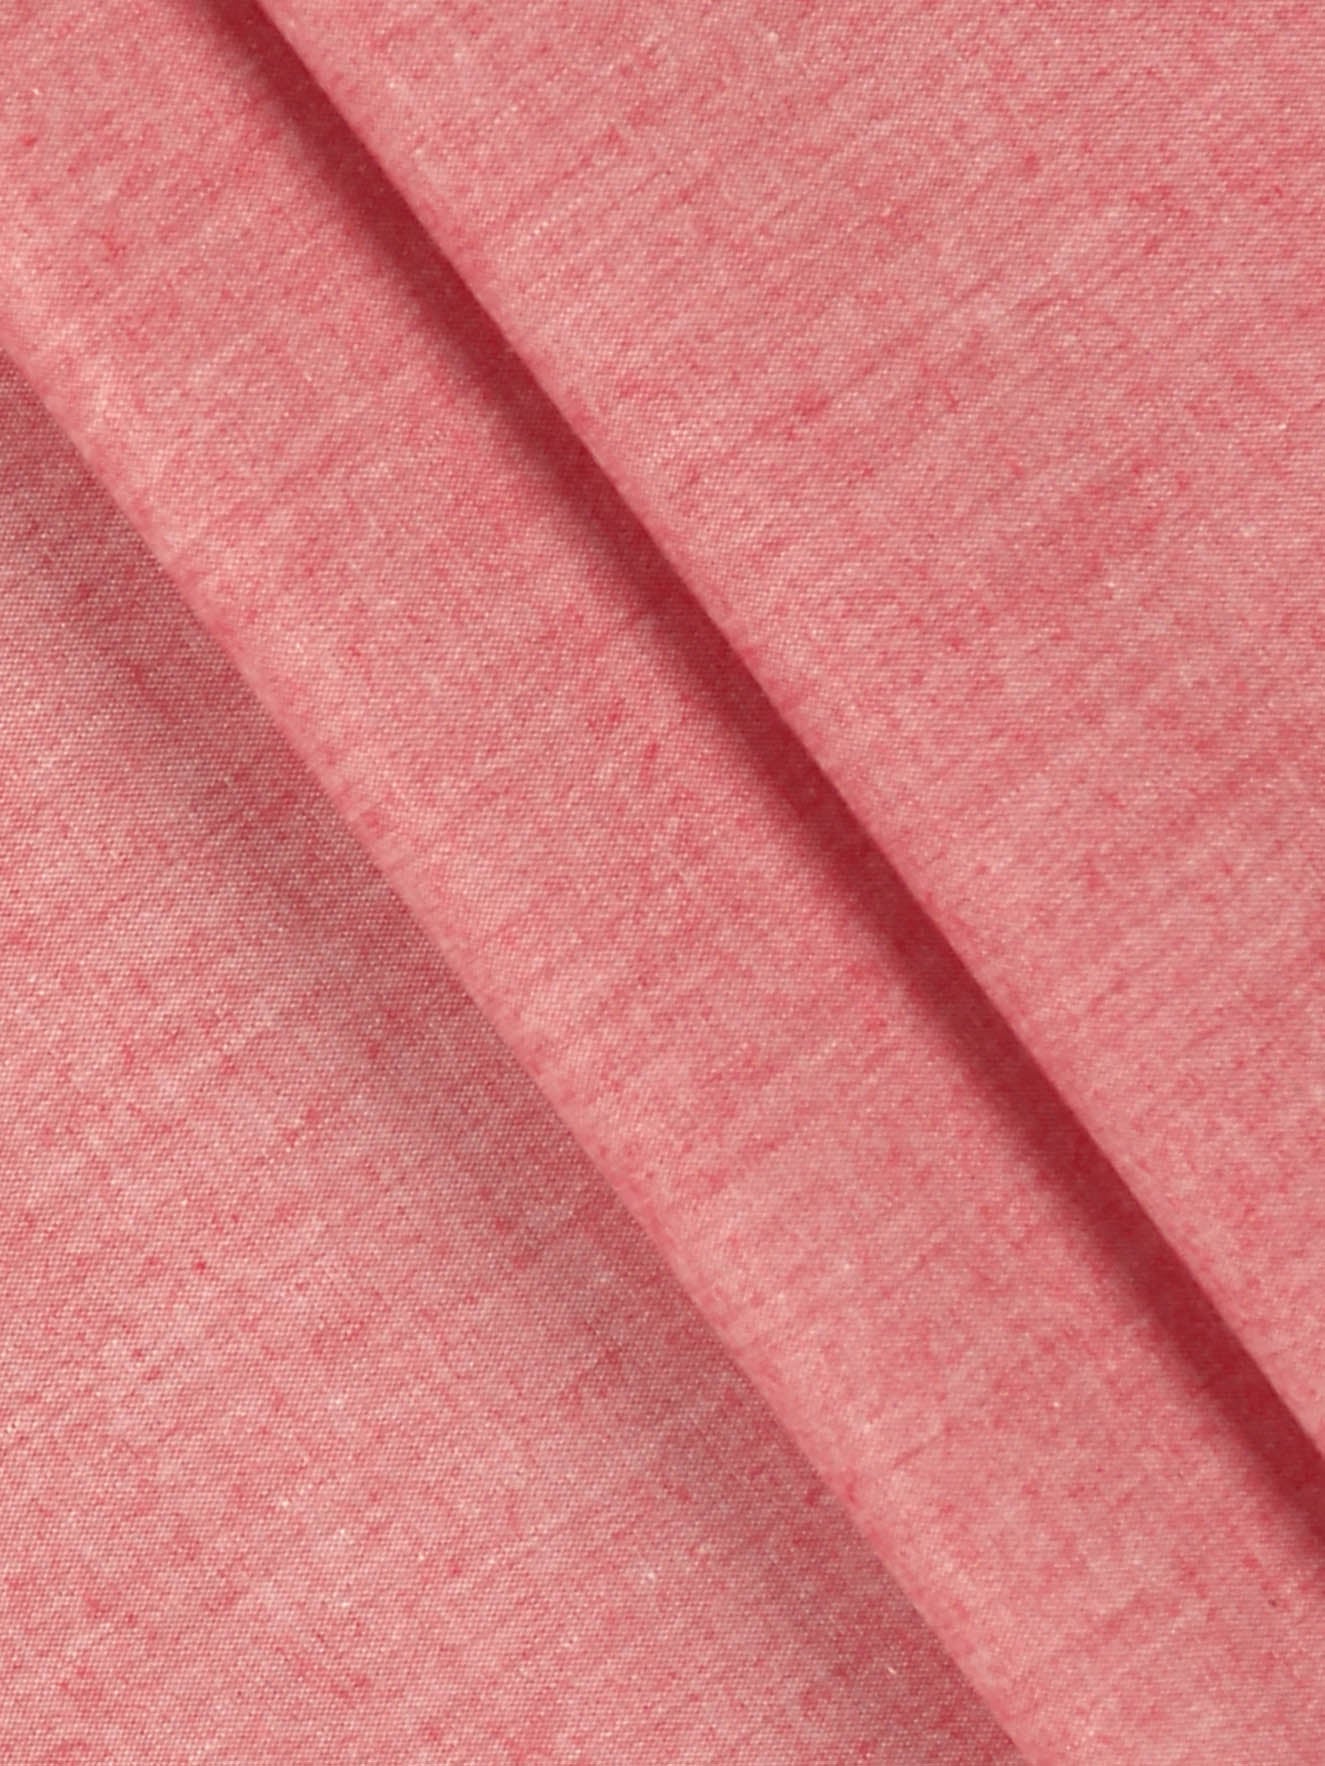 Cotton Colour Plain Pink Shirting Fabric High Style